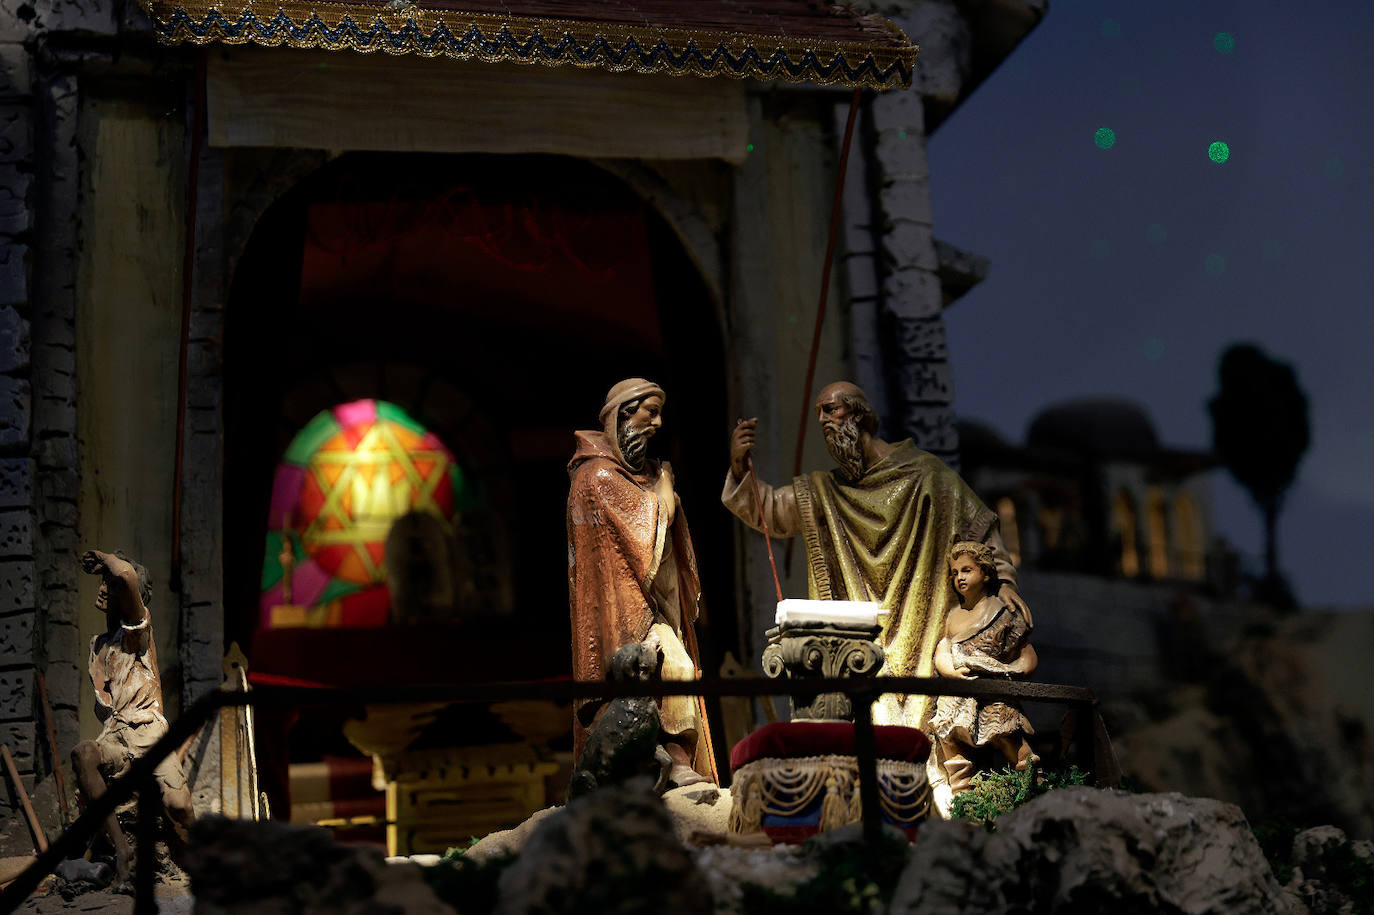 Malaga city hall brightens up Christmas with its huge nativity display, in pictures